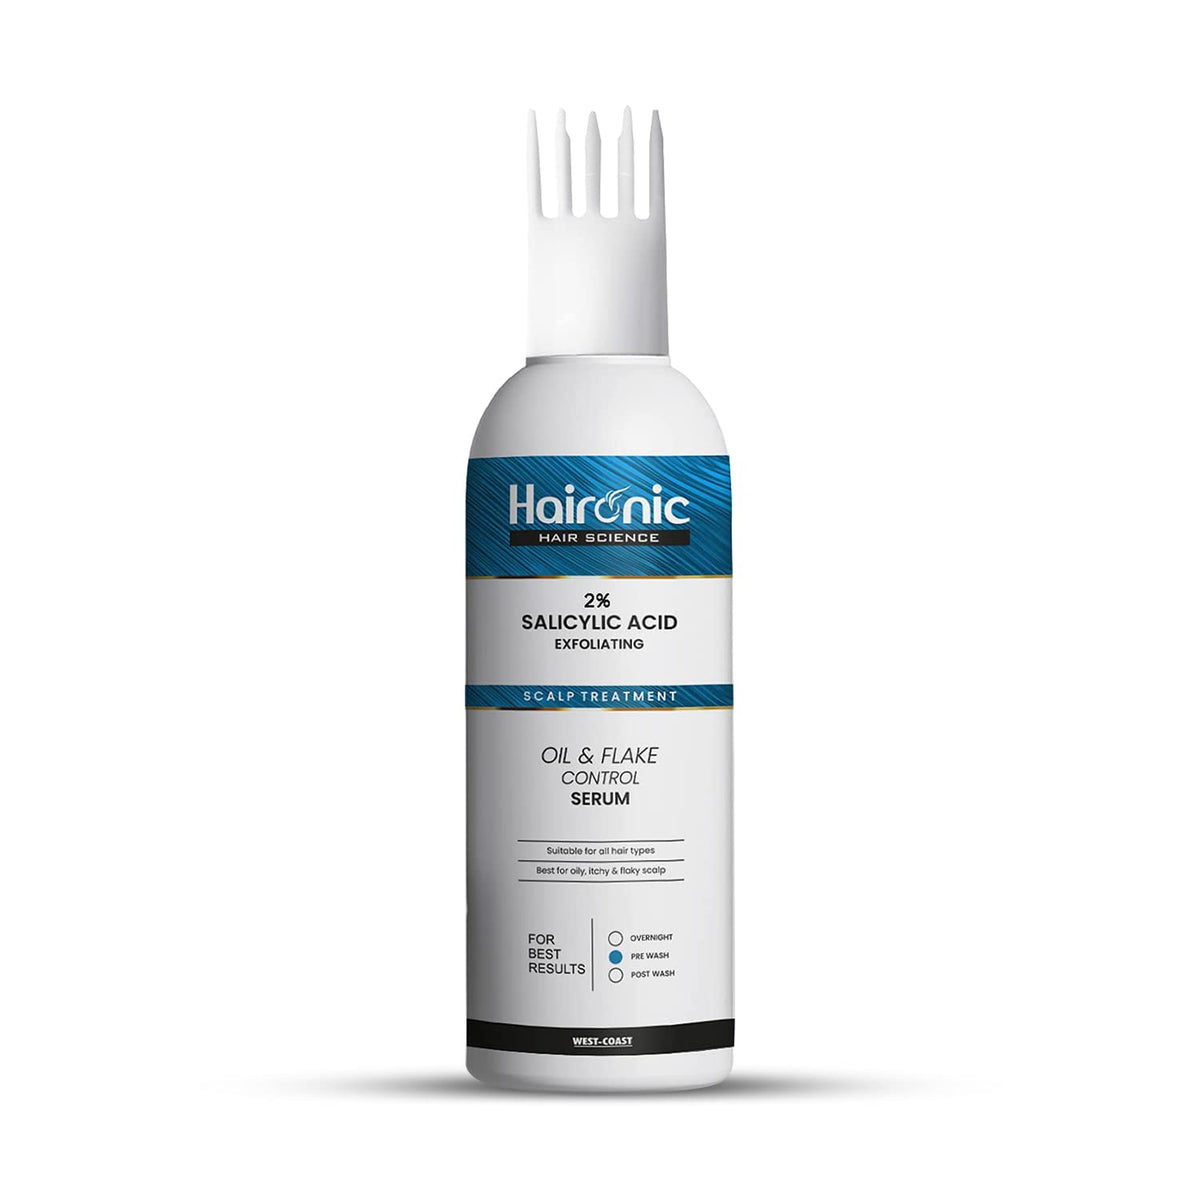 Haironic 2% Salicylic Acid Exfoliating Scalp Oil & Flake Control Hair Serum Best for Oily, Itchy & Flaky Scalp | Suitable for All Hair Types - 100ml